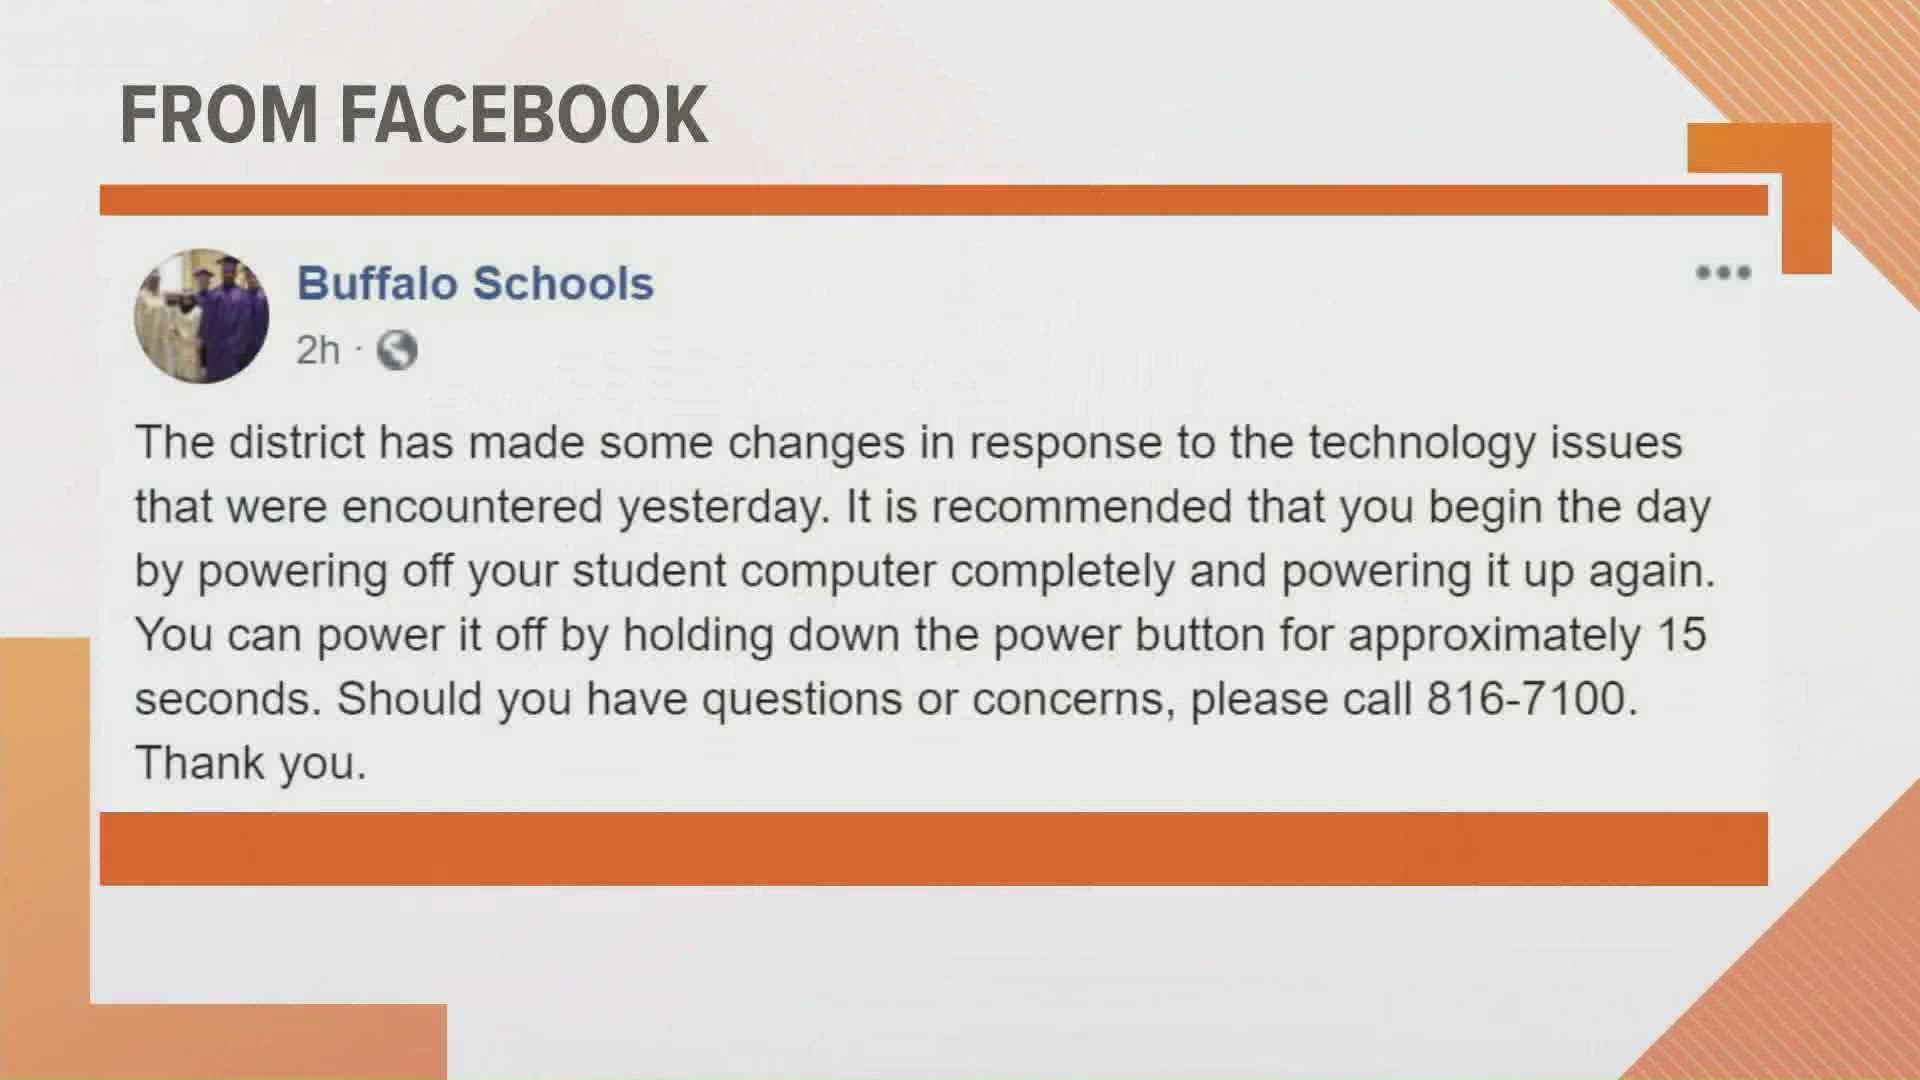 THE DISTRICT SAID IT MADE SOME CHANGES.PARENTS AND STUDENTS SHOULD START THE DAY BY POWERING OFF AND POWERING BACK ON THEIR COMPUTERS.